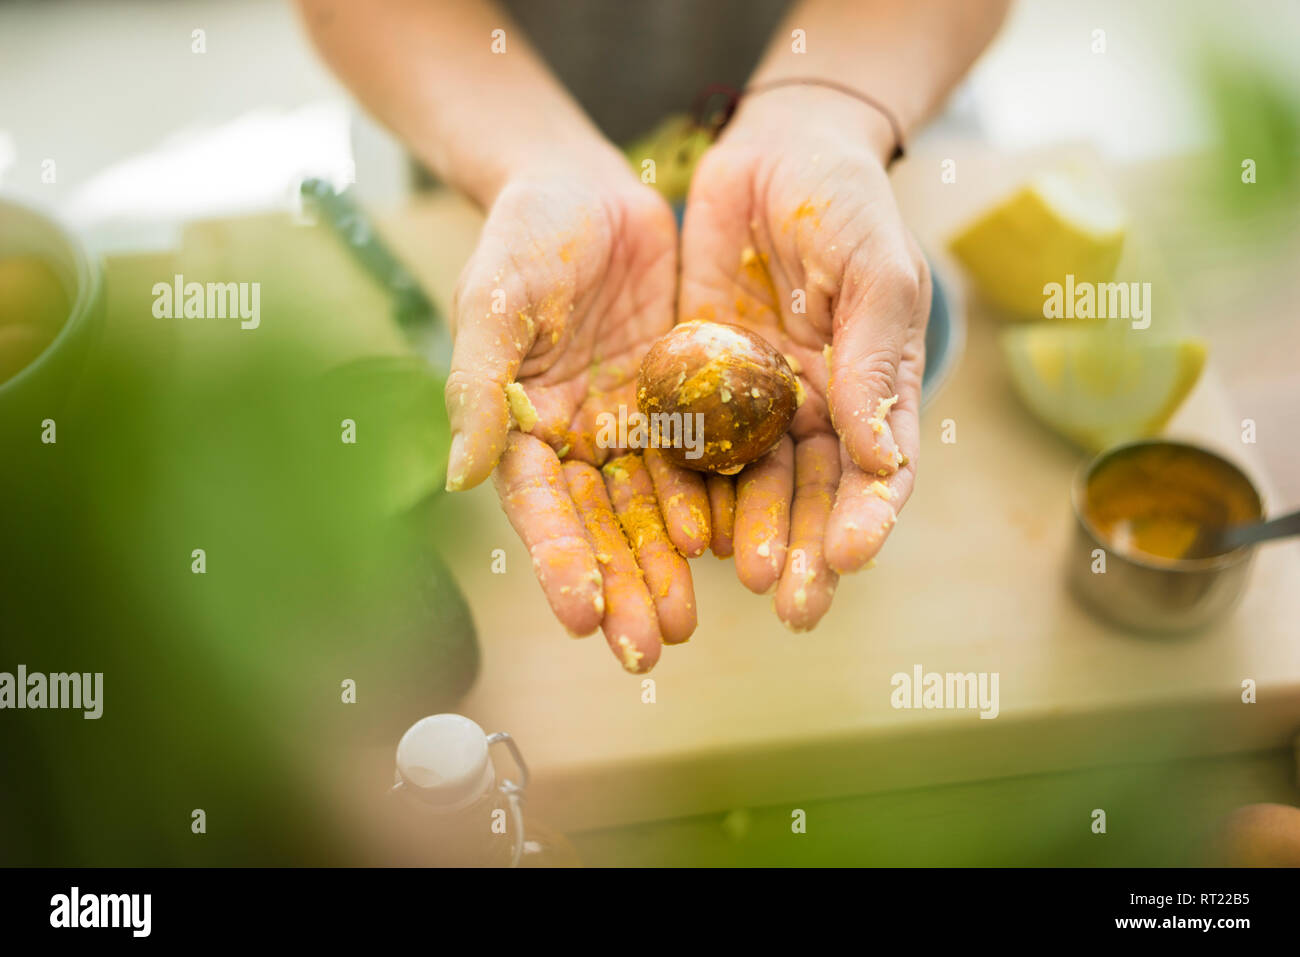 Messy hands holding avocado pit Stock Photo